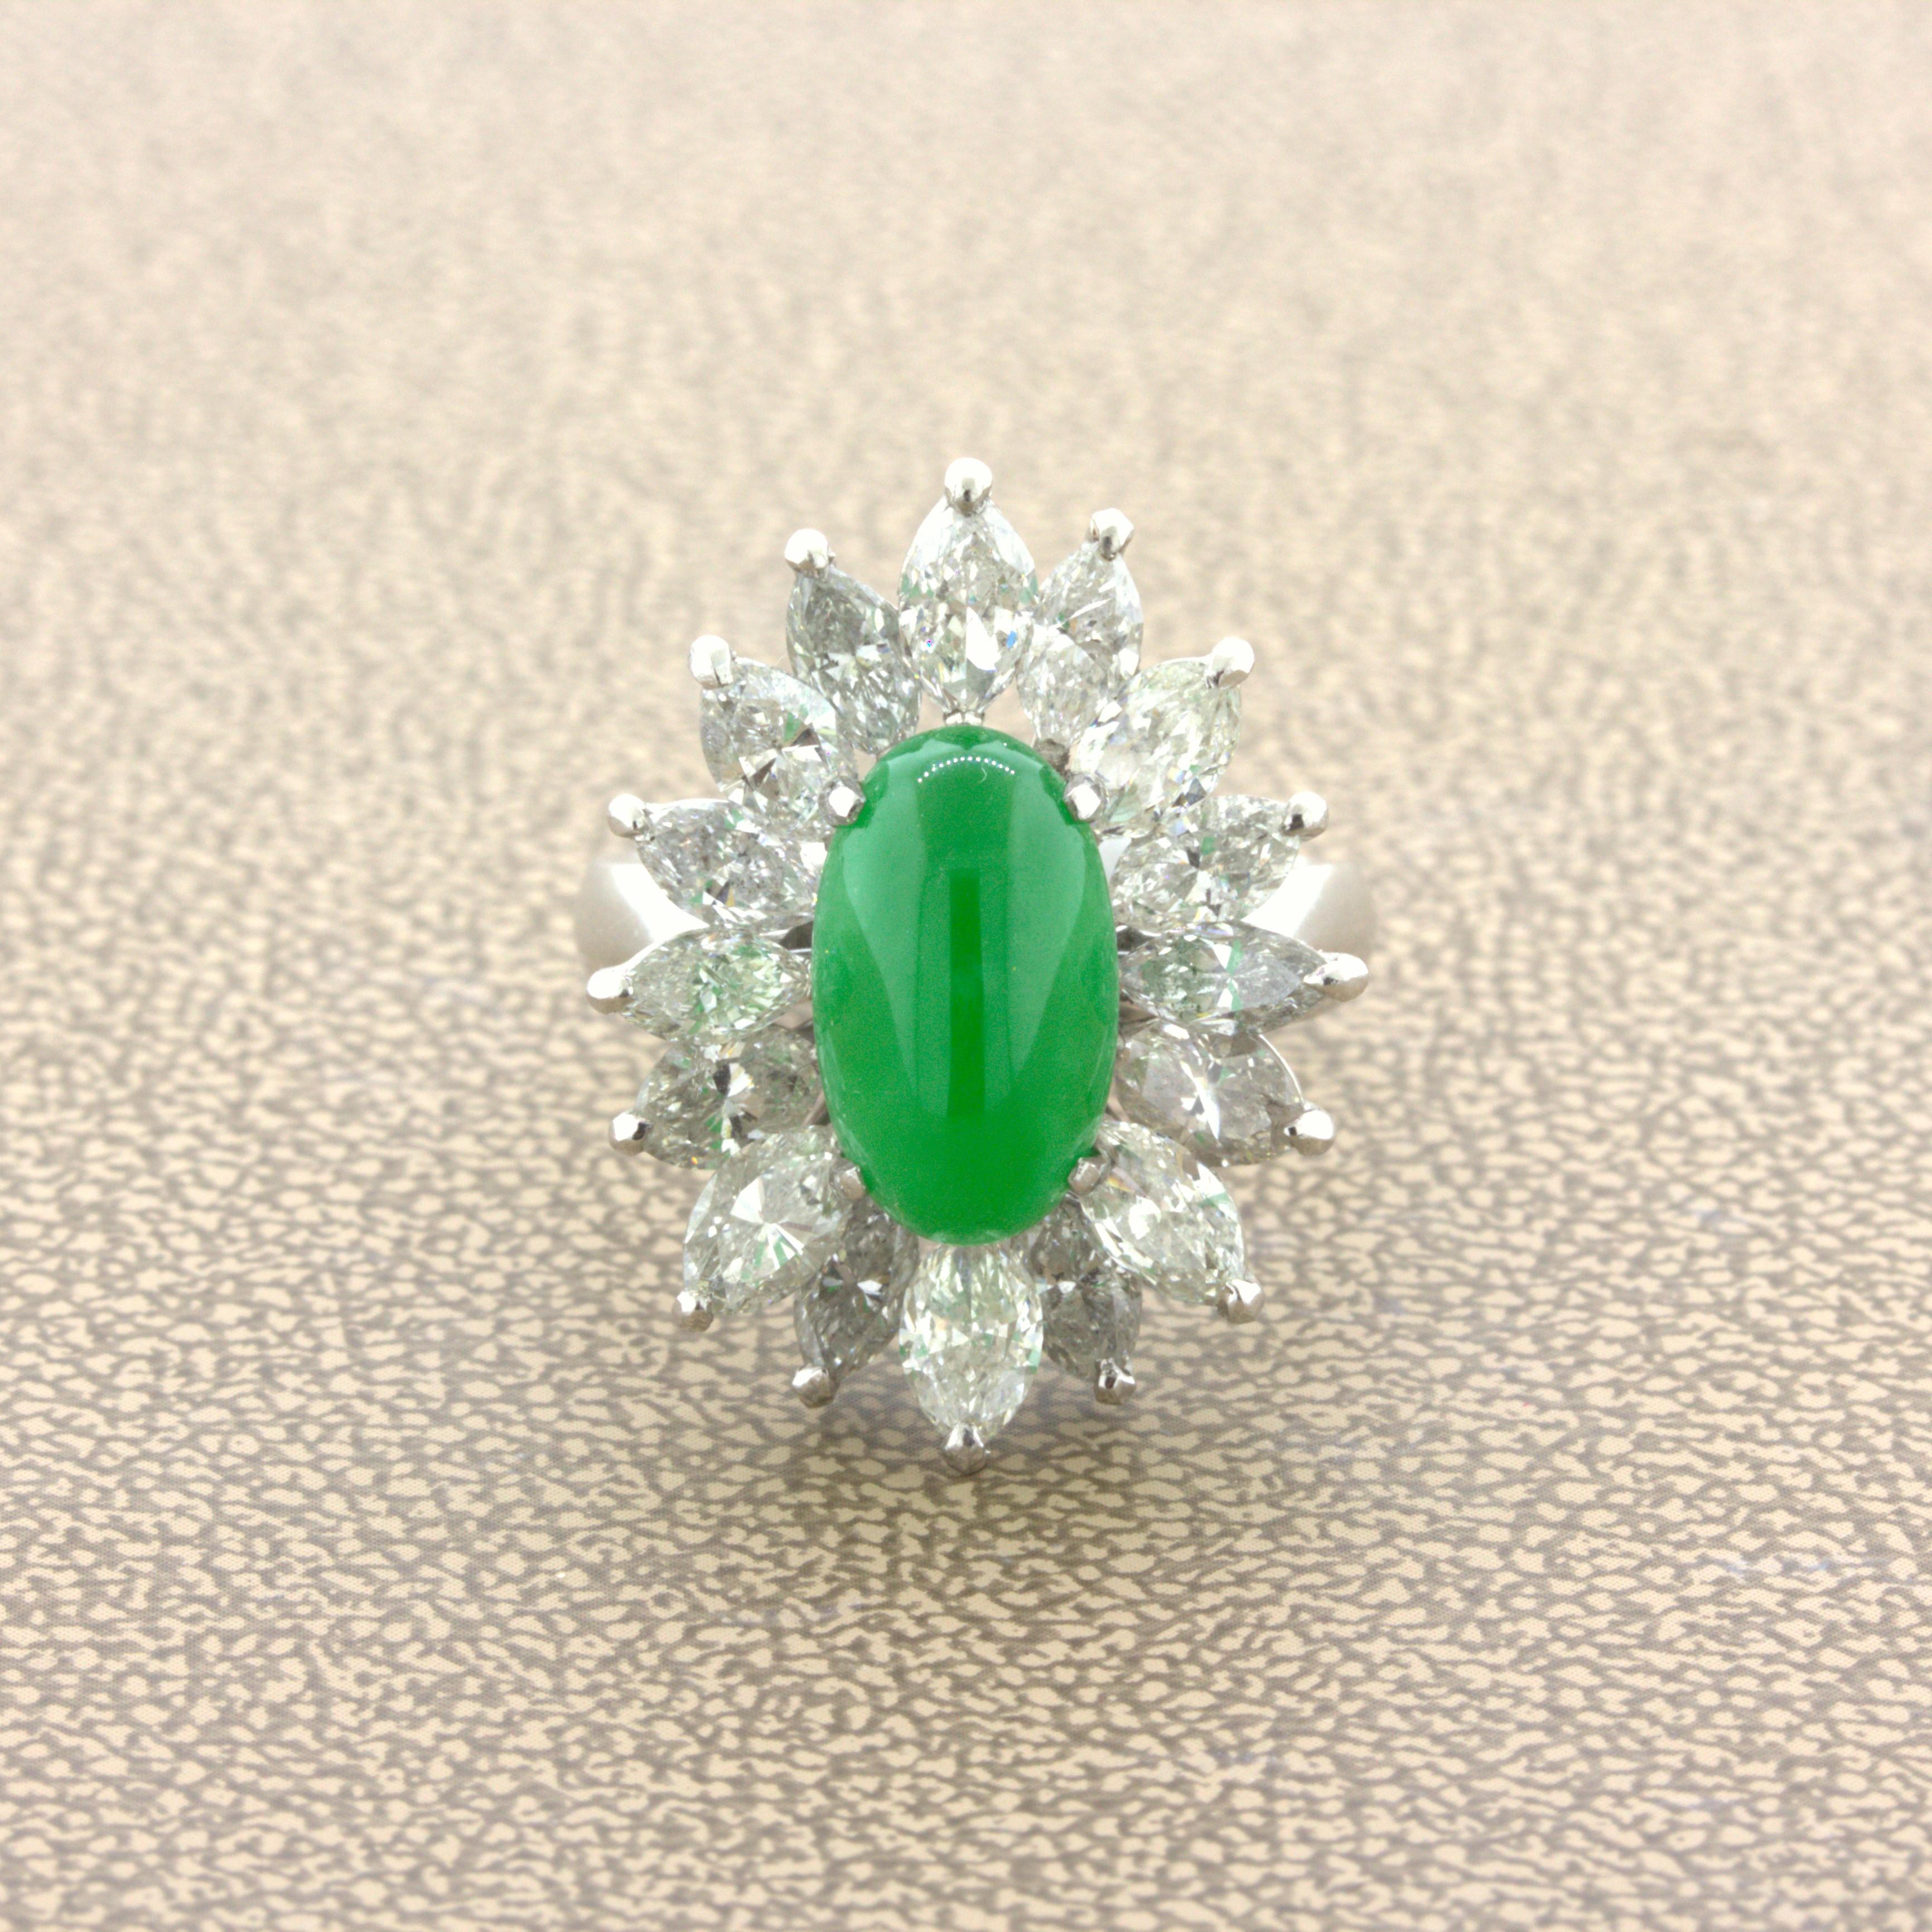 A very fine natural piece of jadeite jade certified by the GIA as “Type A.” It weighs 4.13 carats and has the ideal vivid green color, along with a strong luster that makes the stone appear to glow in the light. Additionally, the jade is free of any